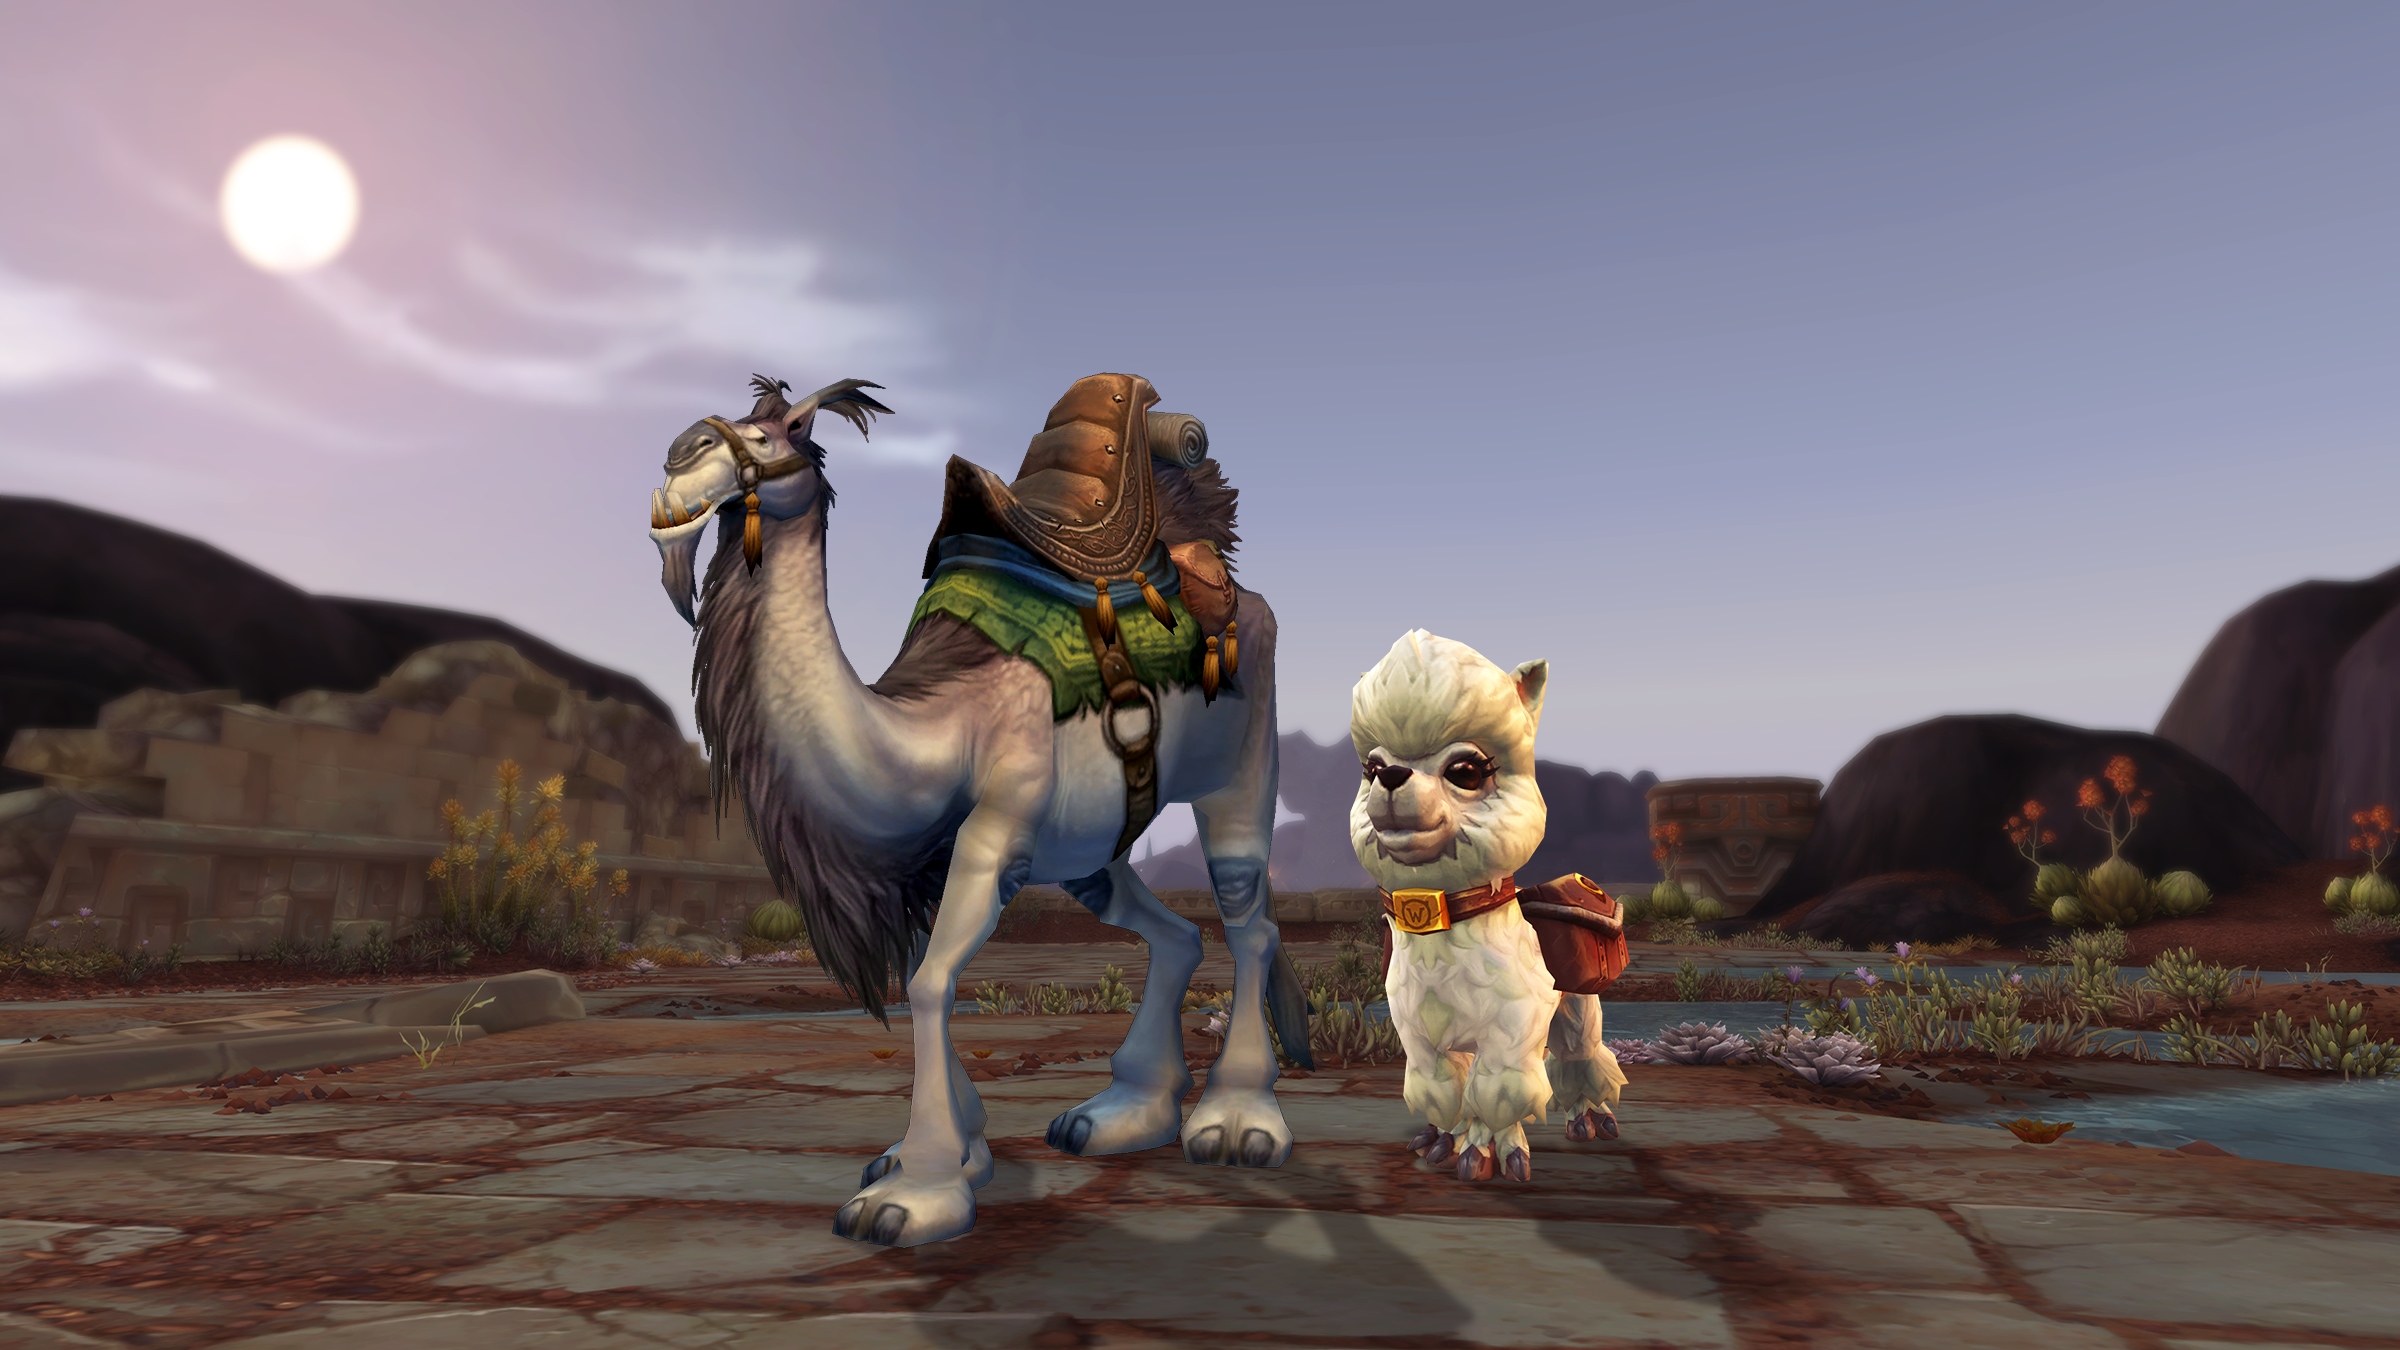 Dragonflight Twitch Drops: Get the Dottie Pet and White Riding Camel Mount